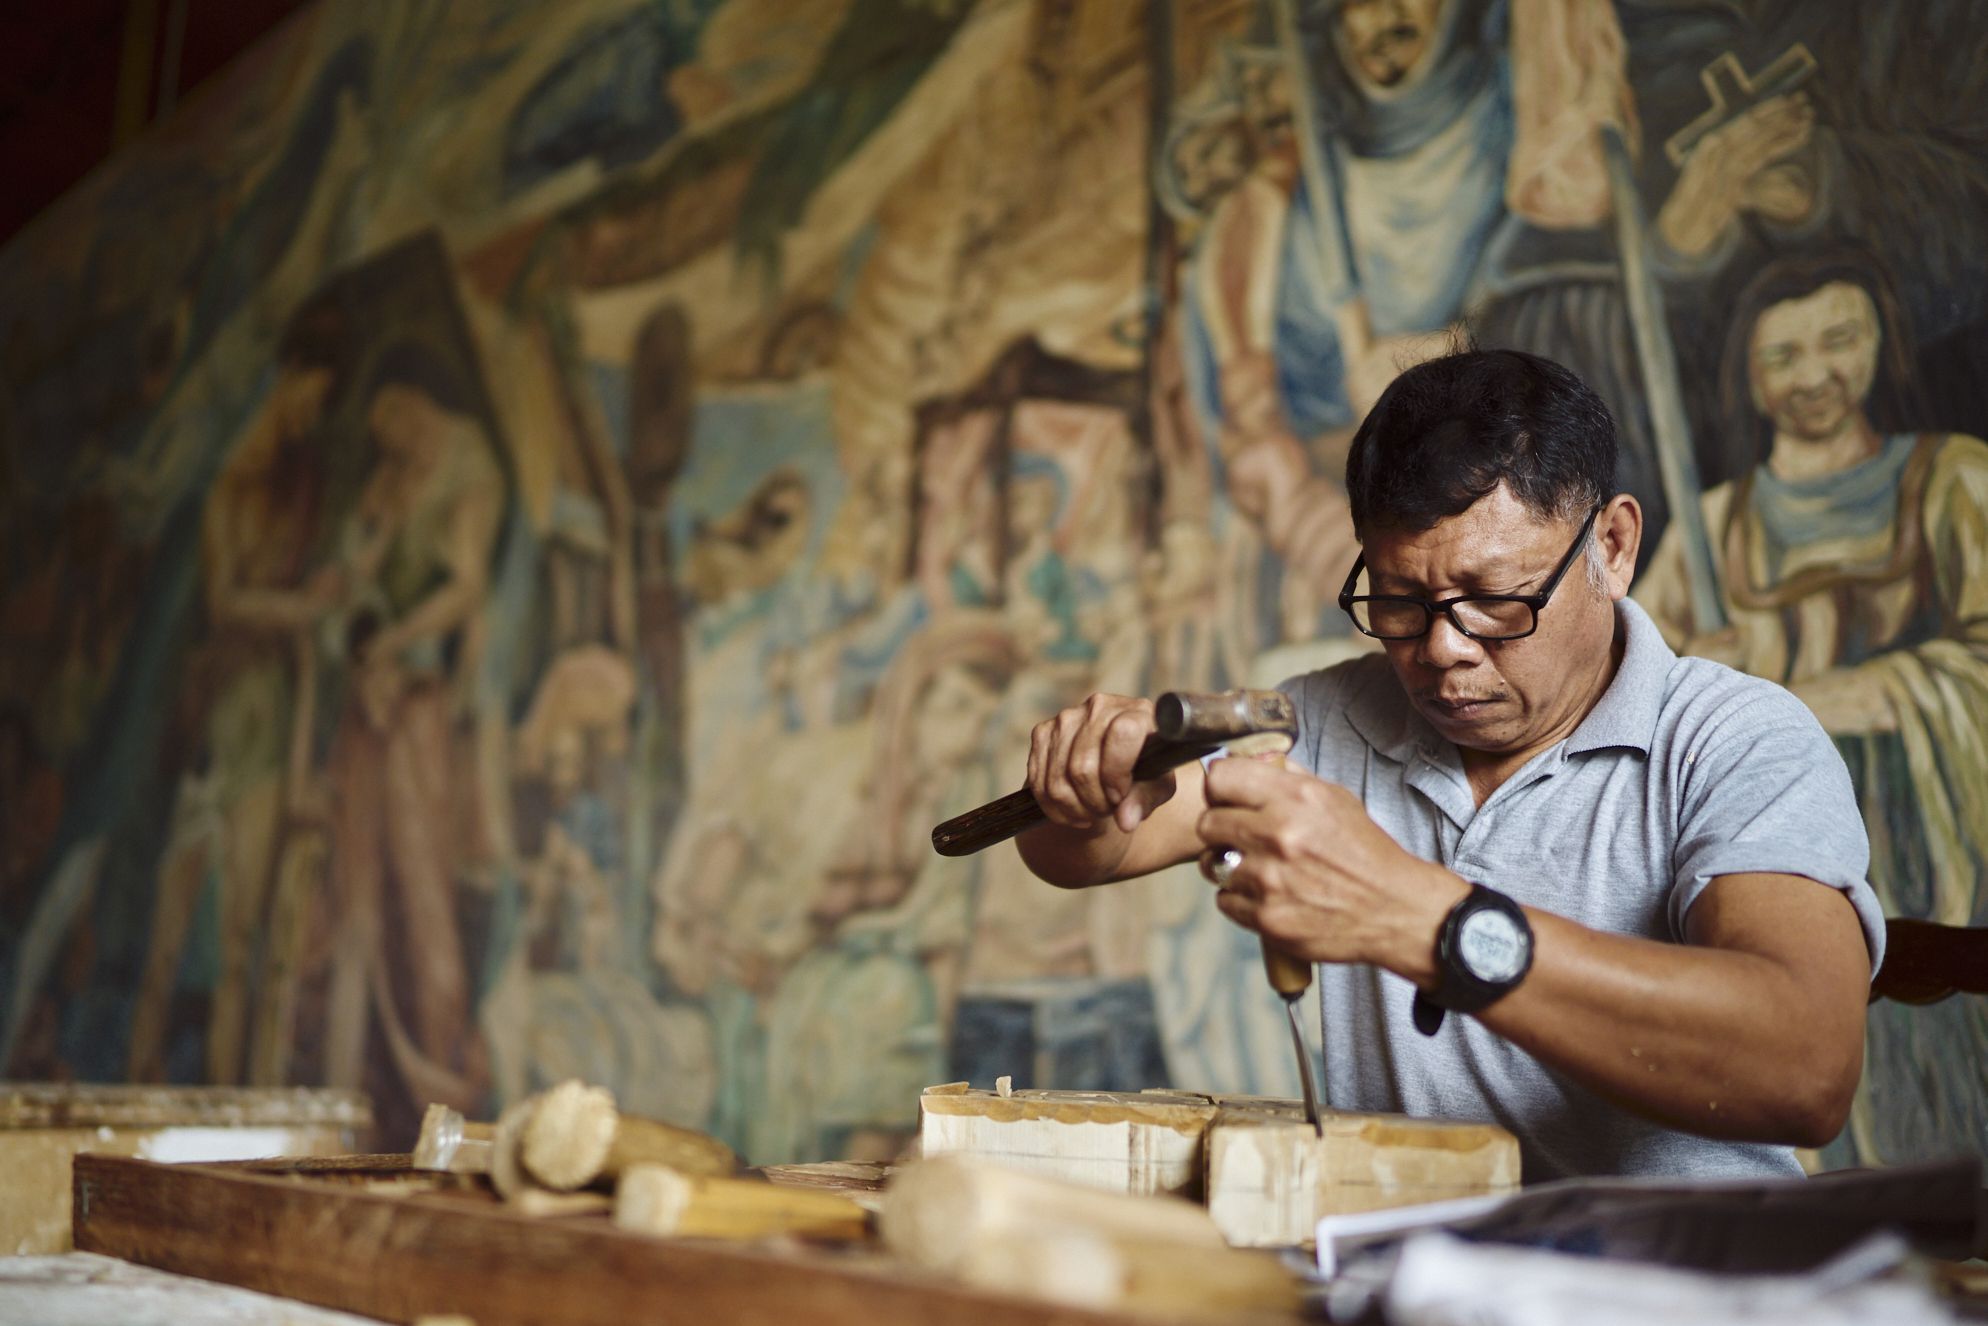 53-year-old Arnold Flores has been working as a sculptor in Las Casas Filipinas de Acuzar for four years, creating intricate hand-carved wood and styro pieces